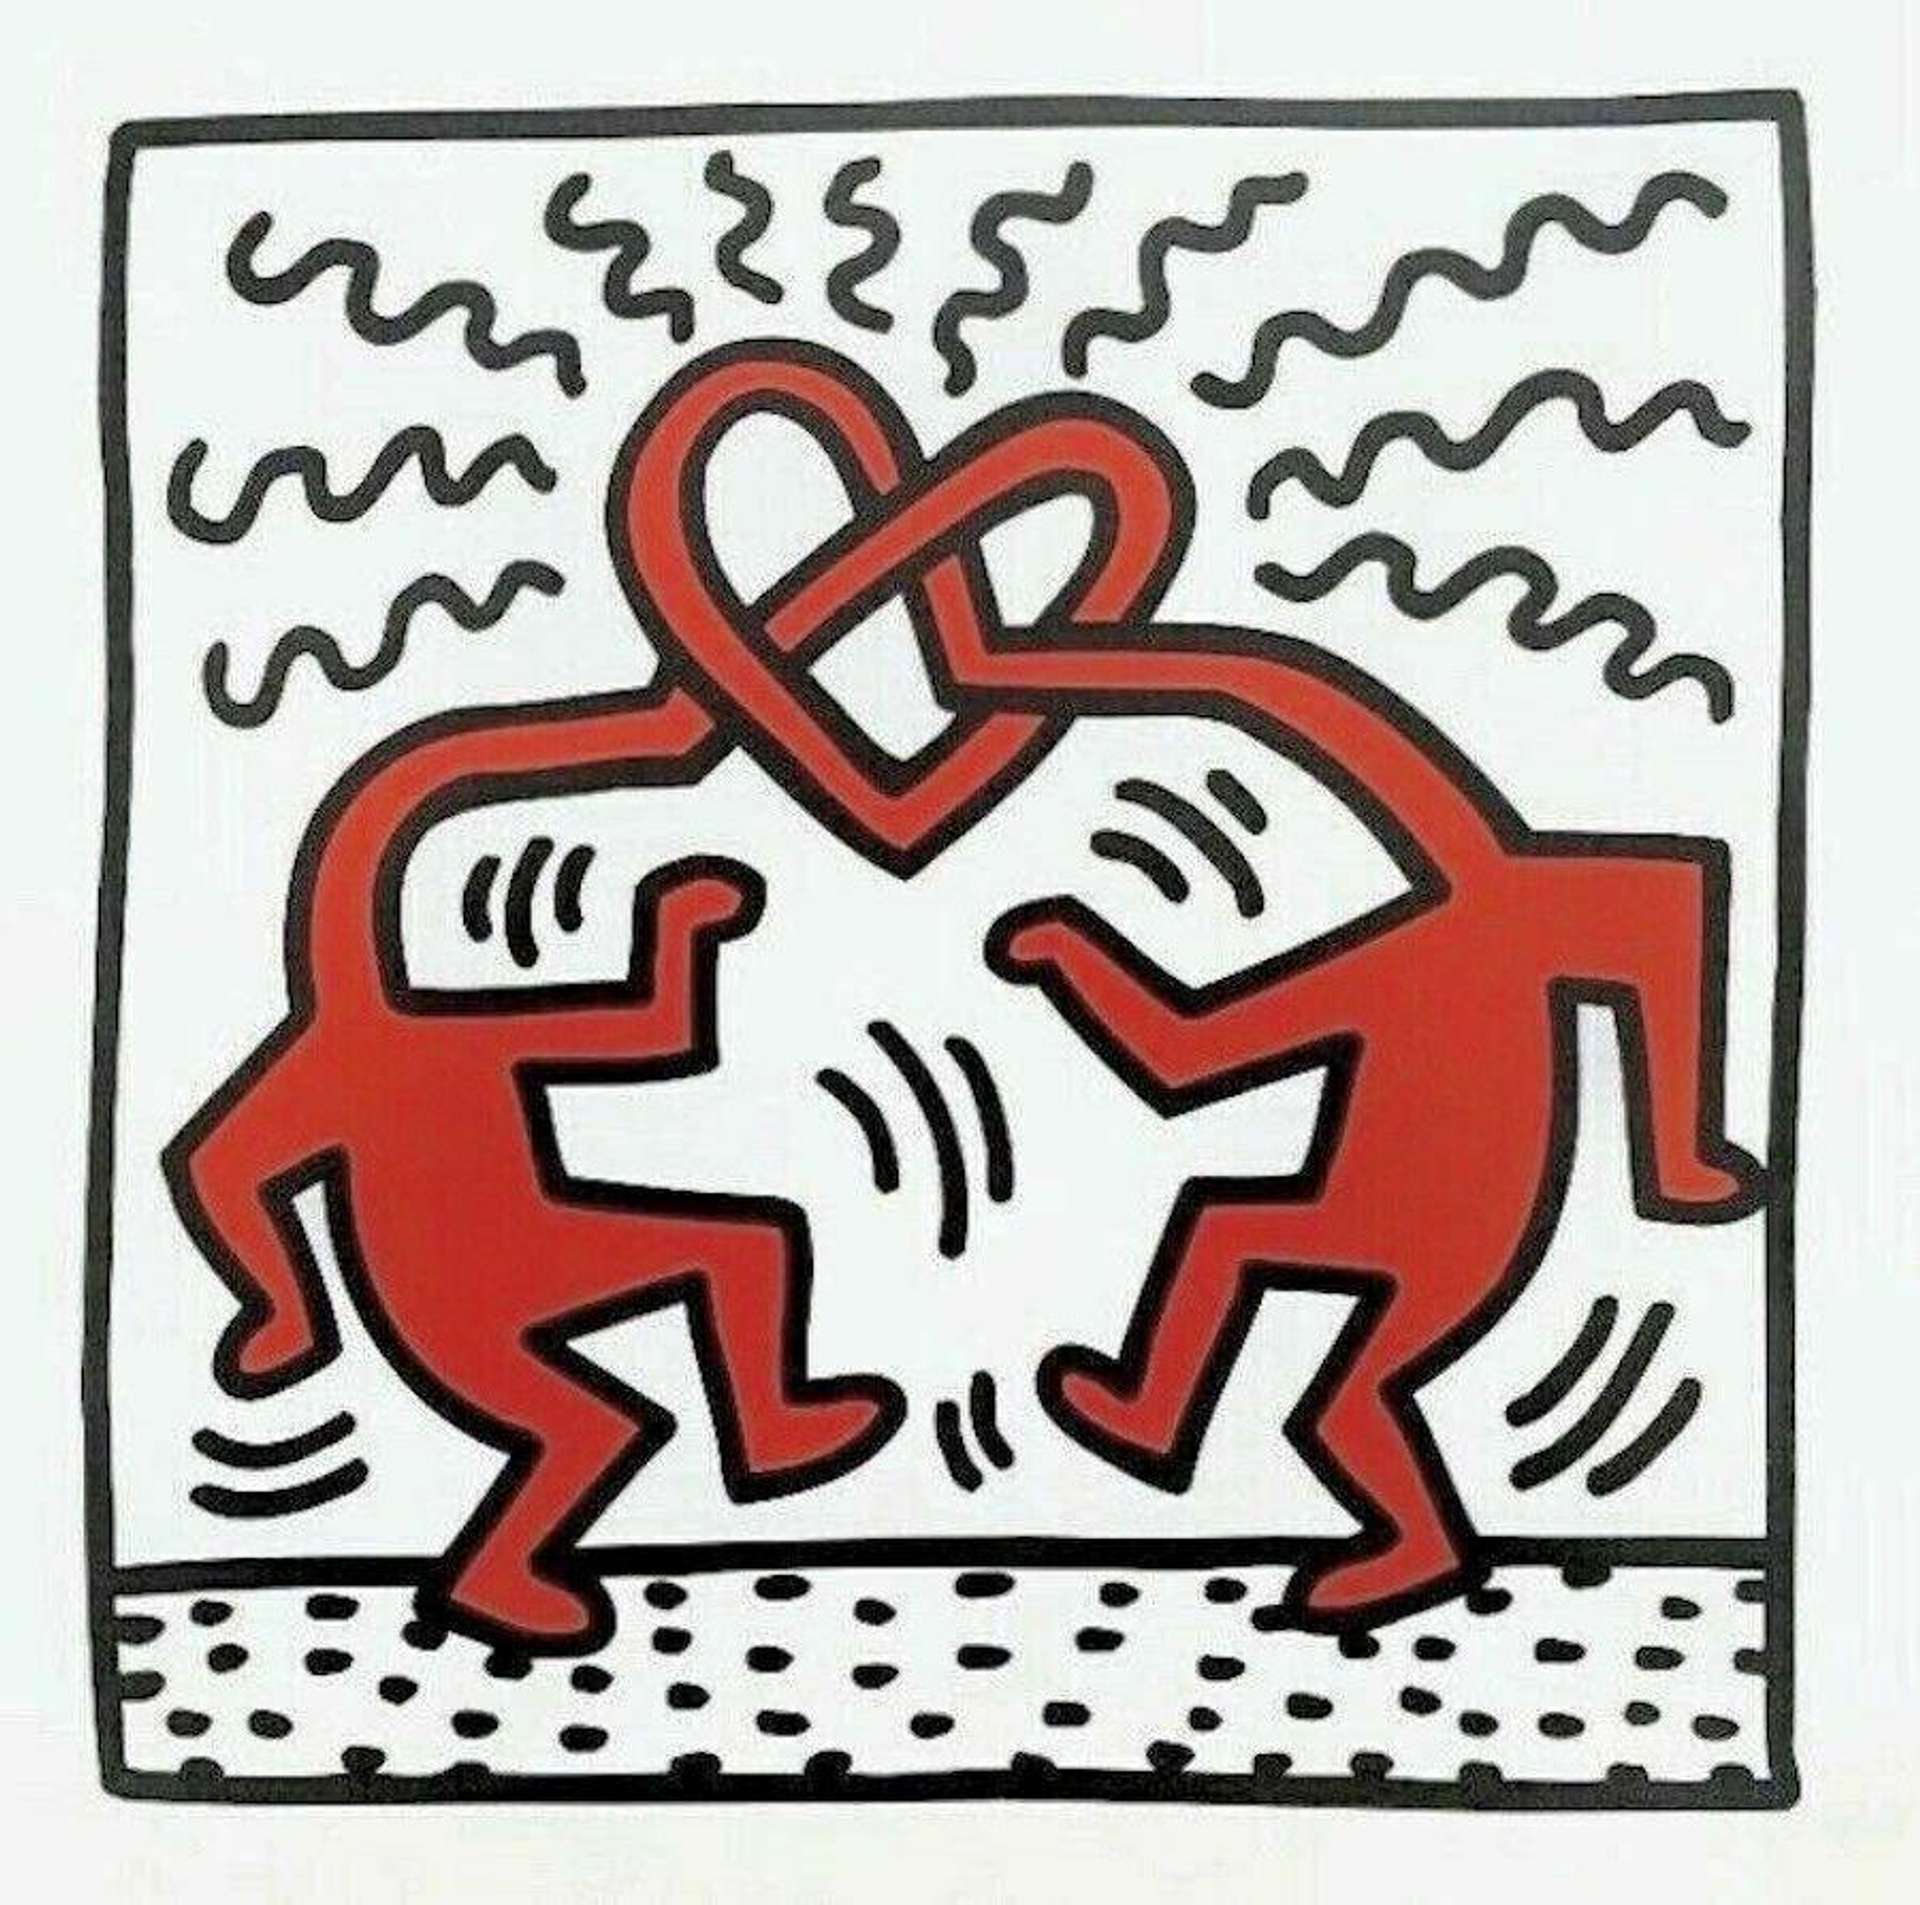 Untitled (1989) by Keith Haring. The imaged shows two dancing figures, their necks conjoined to form a central heart. The figures are rendered in bright red and outlined with bold, black lines